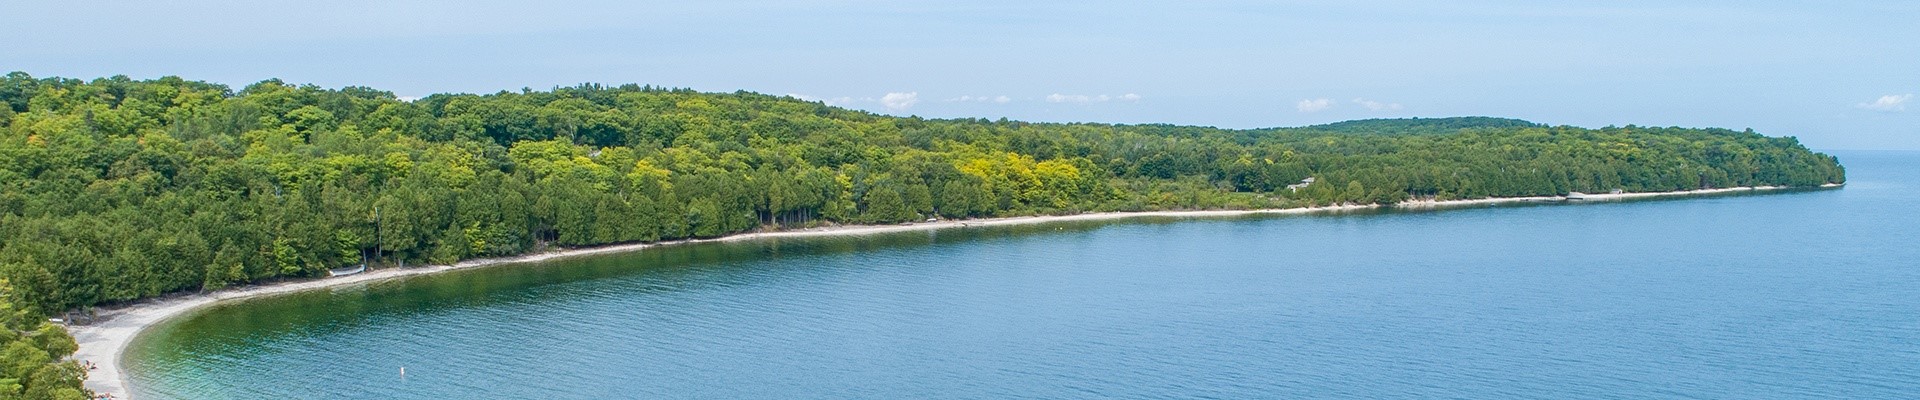 Distant view of part of Washington Island 